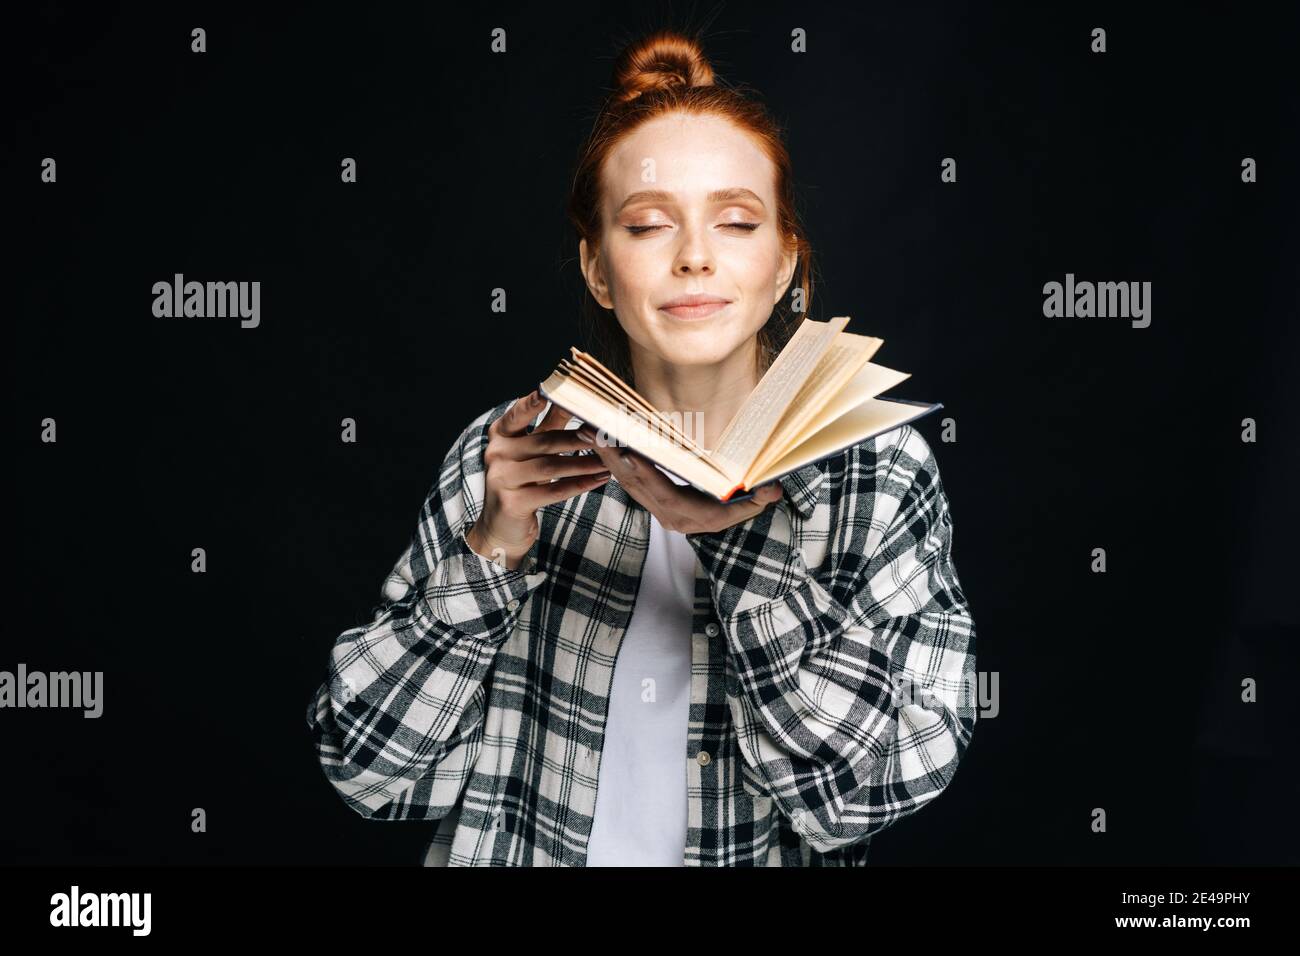 Portrait of positive young woman college student standing with closed eyes holding opened book Stock Photo